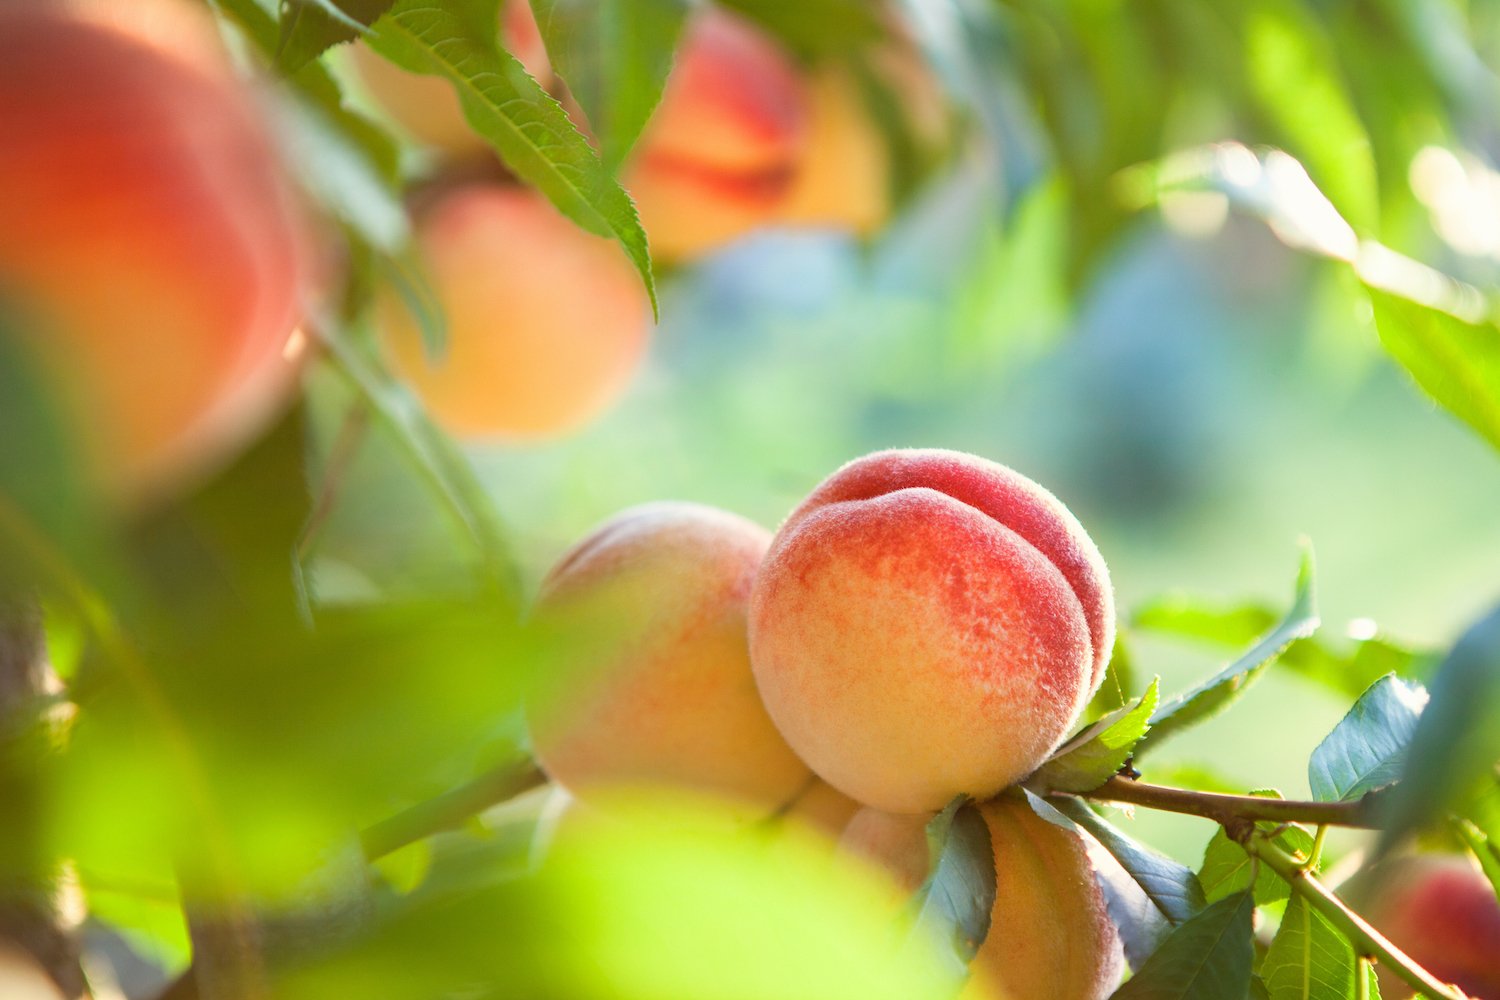 Sweet peach fruits growing on a peach tree branch. June 2021